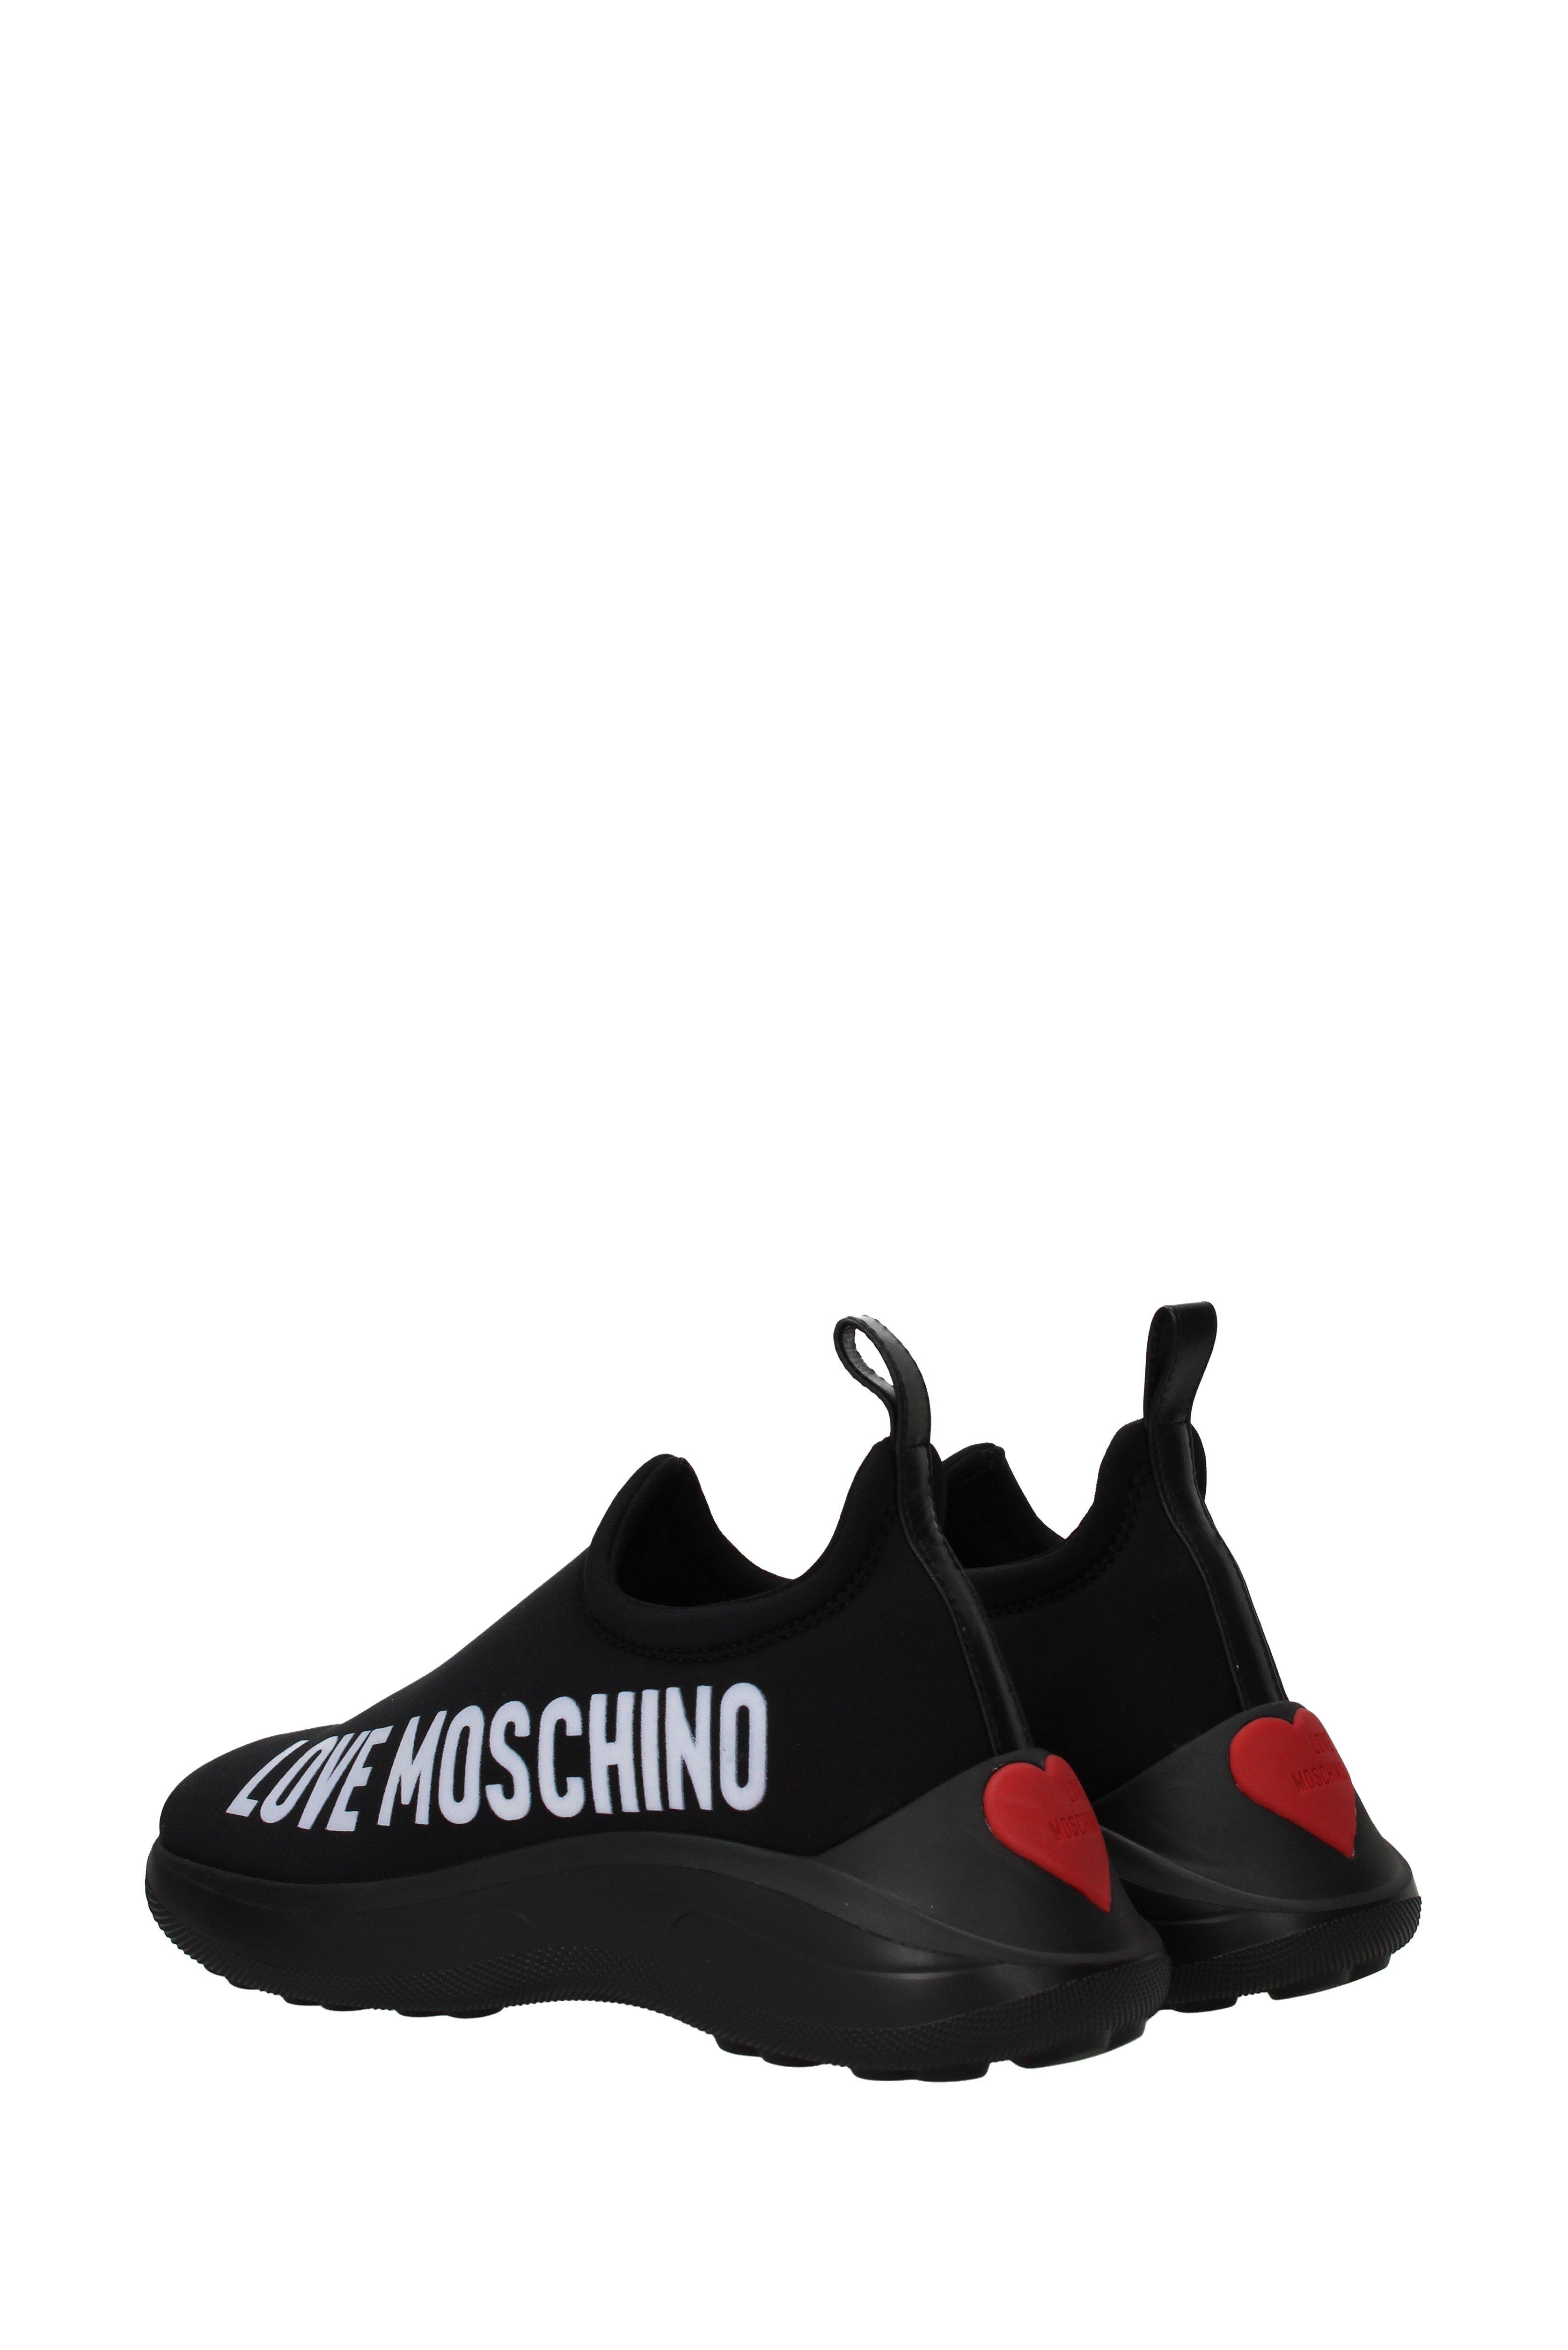 love moschino shoes womens